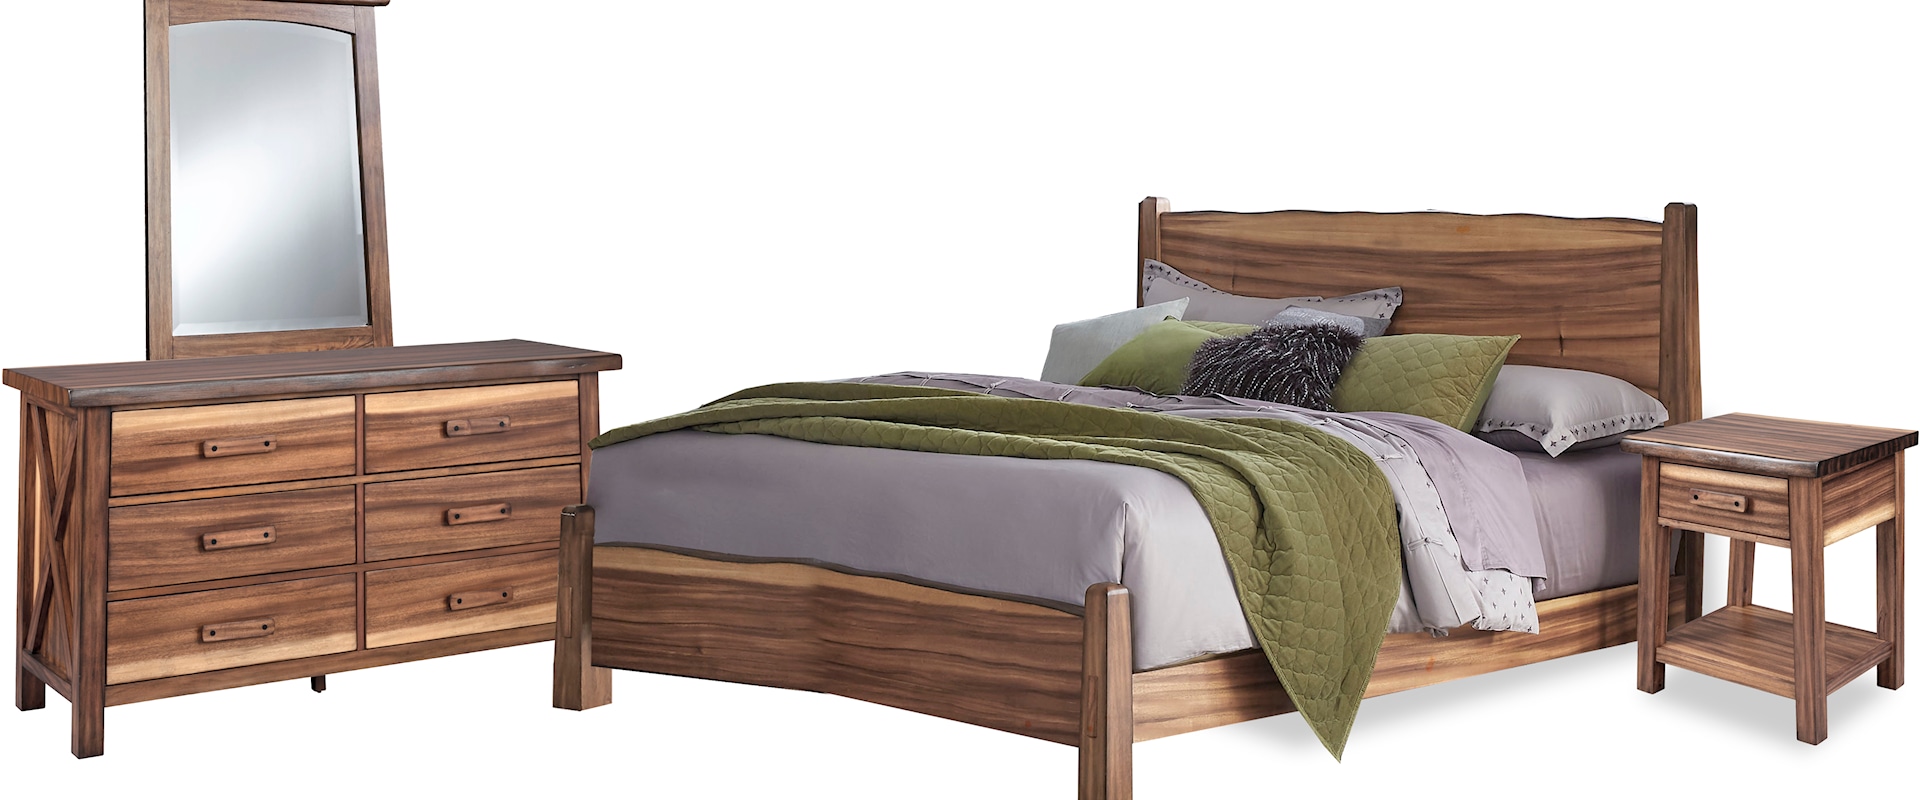 King Bedroom Set with Nightstand, Dresser, and Mirror